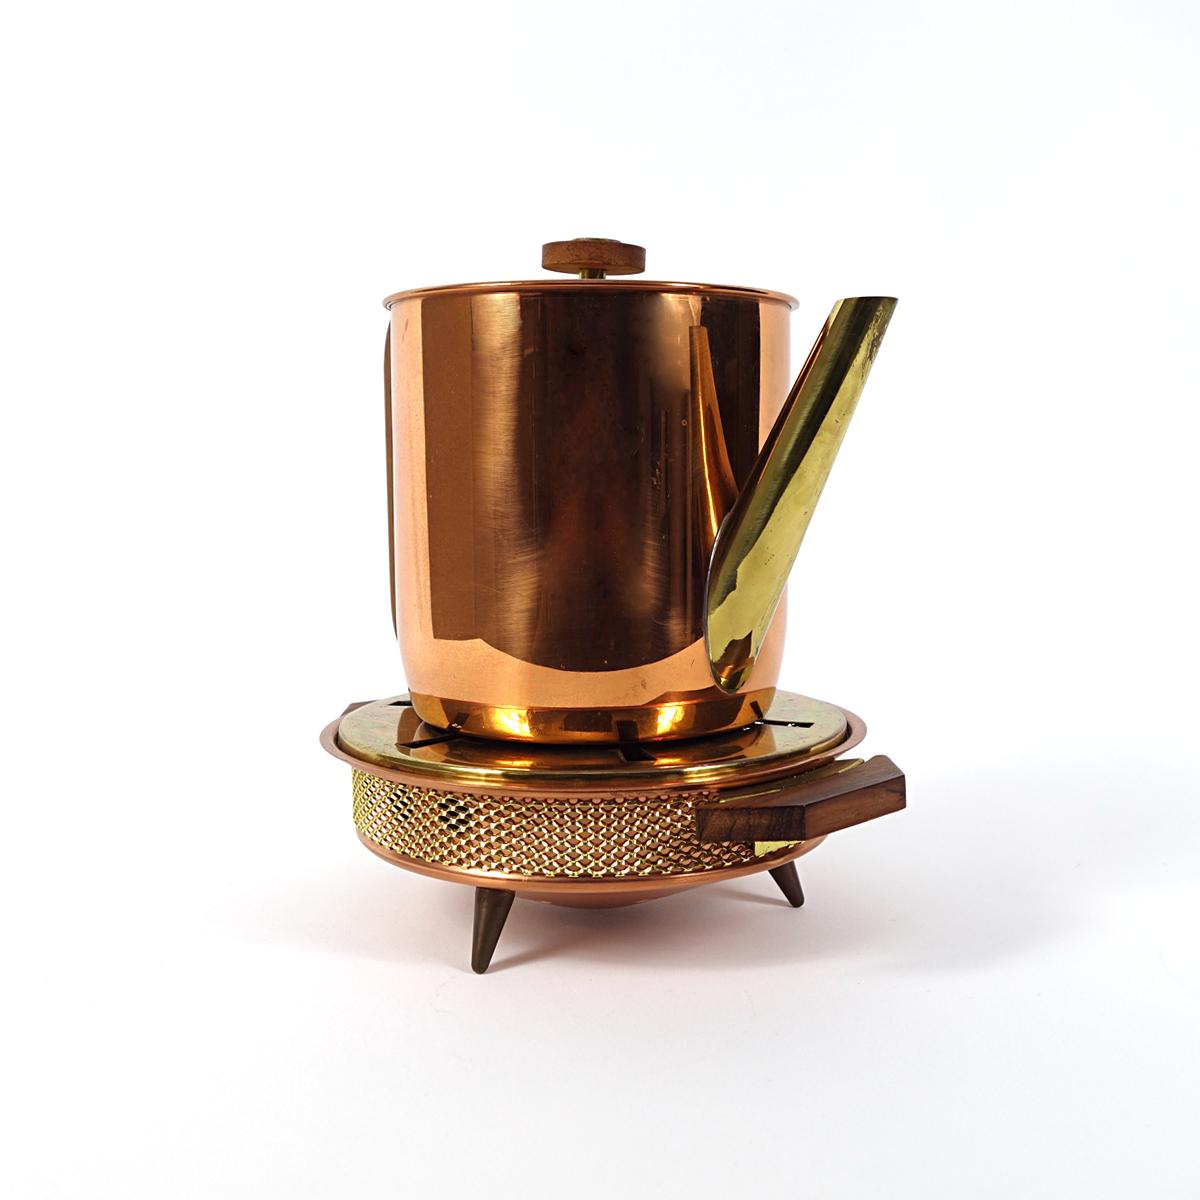 Subtly styled copper teapot with wooden lid and handle, plus matching tea light, in Art Deco-style.

Beautiful design for this very rarely used tea pot with its graceful wooden handle and wooden ring around the copper of the lid cap, allowing for